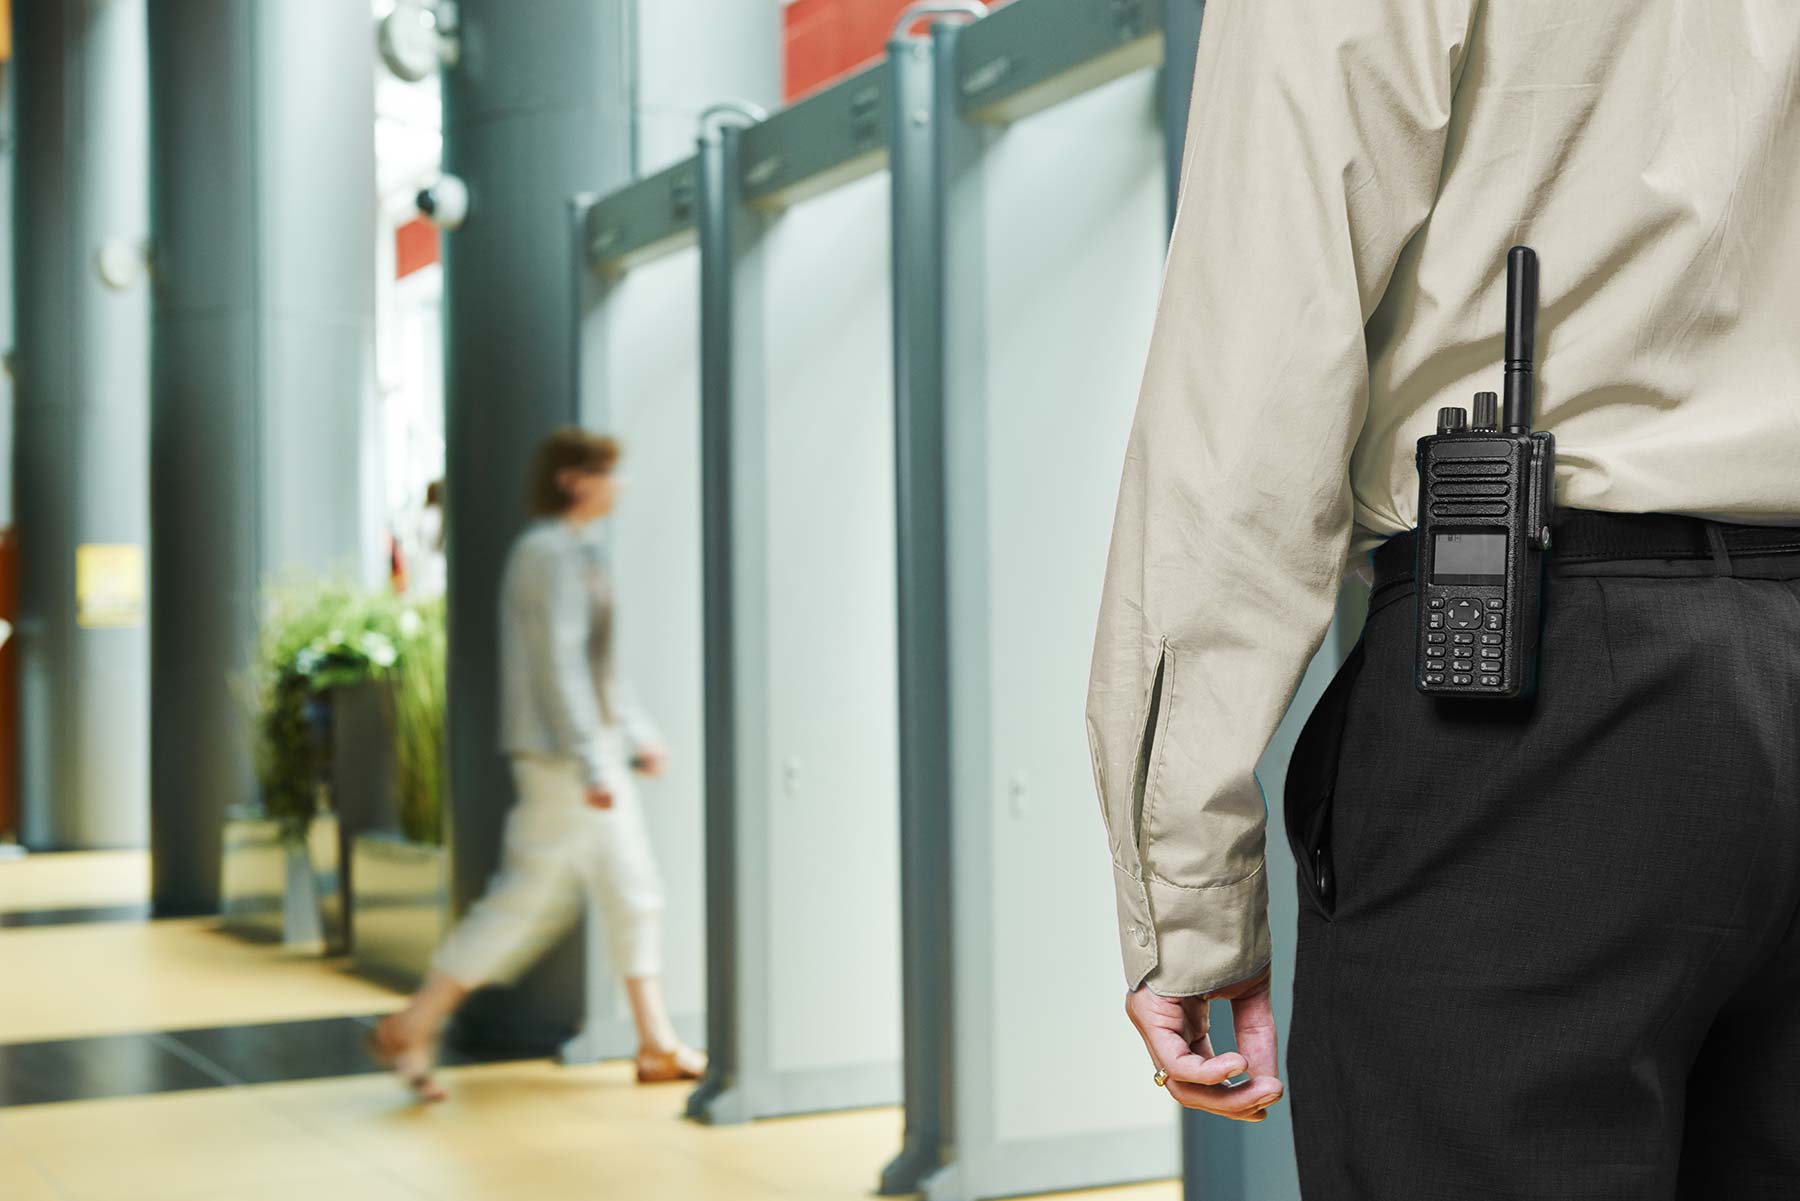 More than a Hospitality Security Company | Officers do more than the average Guard | We specialize in providing guards and protection for hotels, casinos, and resorts in the Arizona and Illinois areas, give us a call for a free consultation today